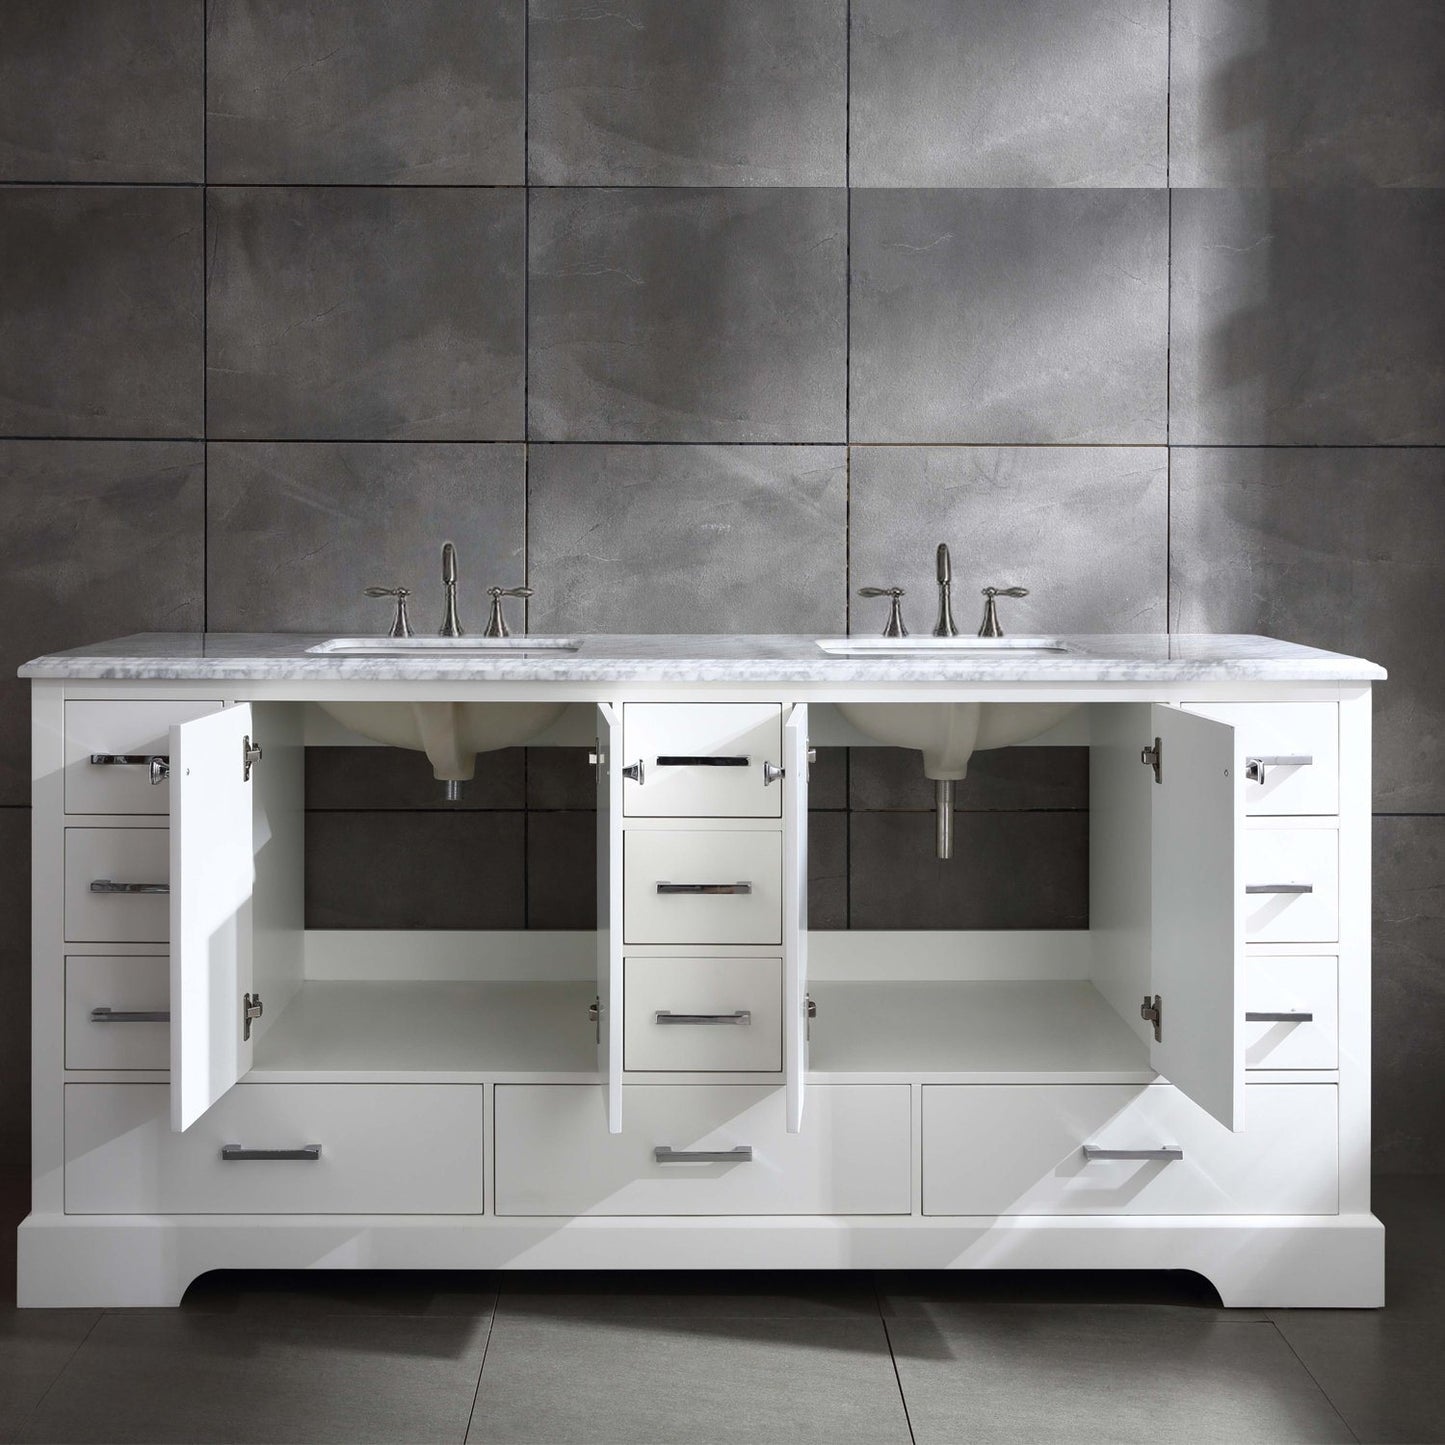 Eviva Storehouse 84 Inch Bathroom Vanity with Laxurious White Carrera Counter-top - Luxe Bathroom Vanities Luxury Bathroom Fixtures Bathroom Furniture